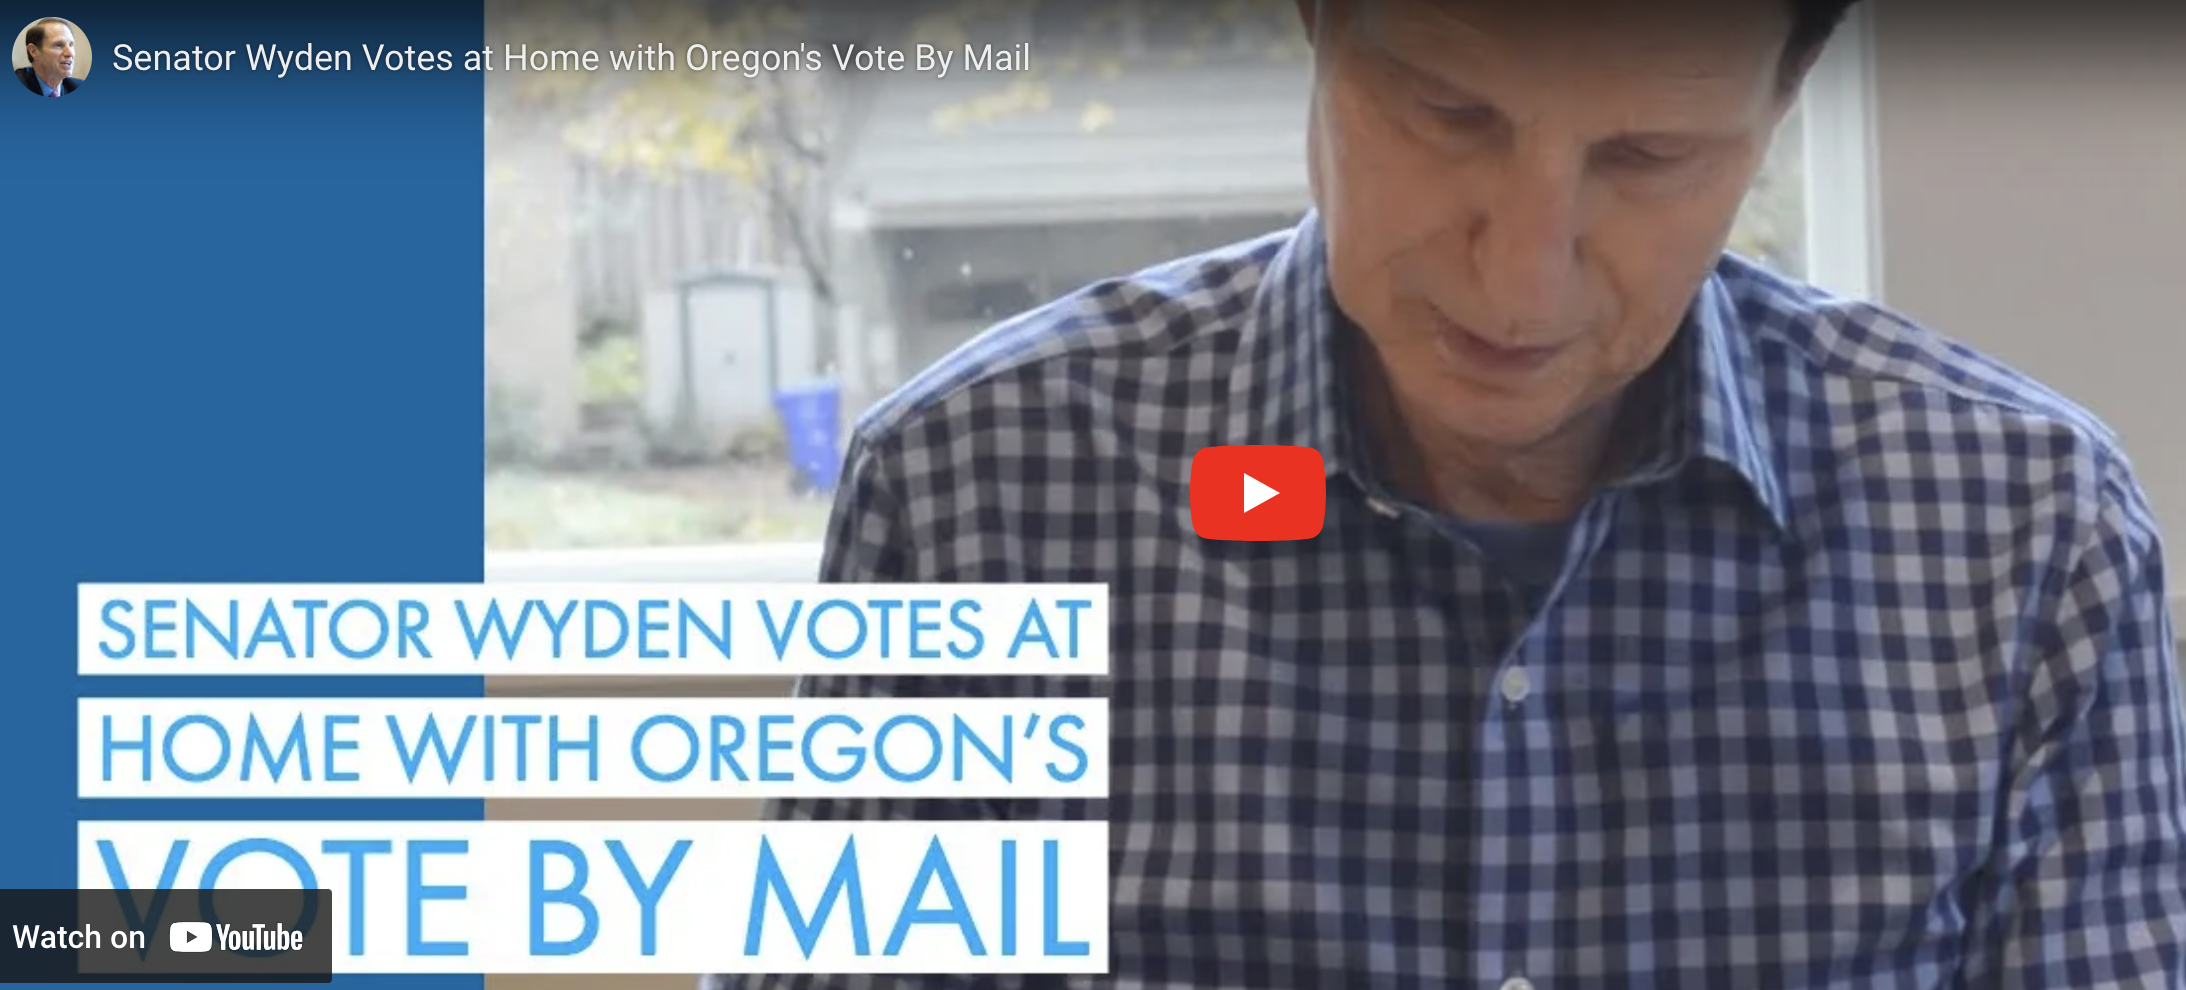 U.S. Senator Wyden Votes at Home with Oregon's Vote By Mail